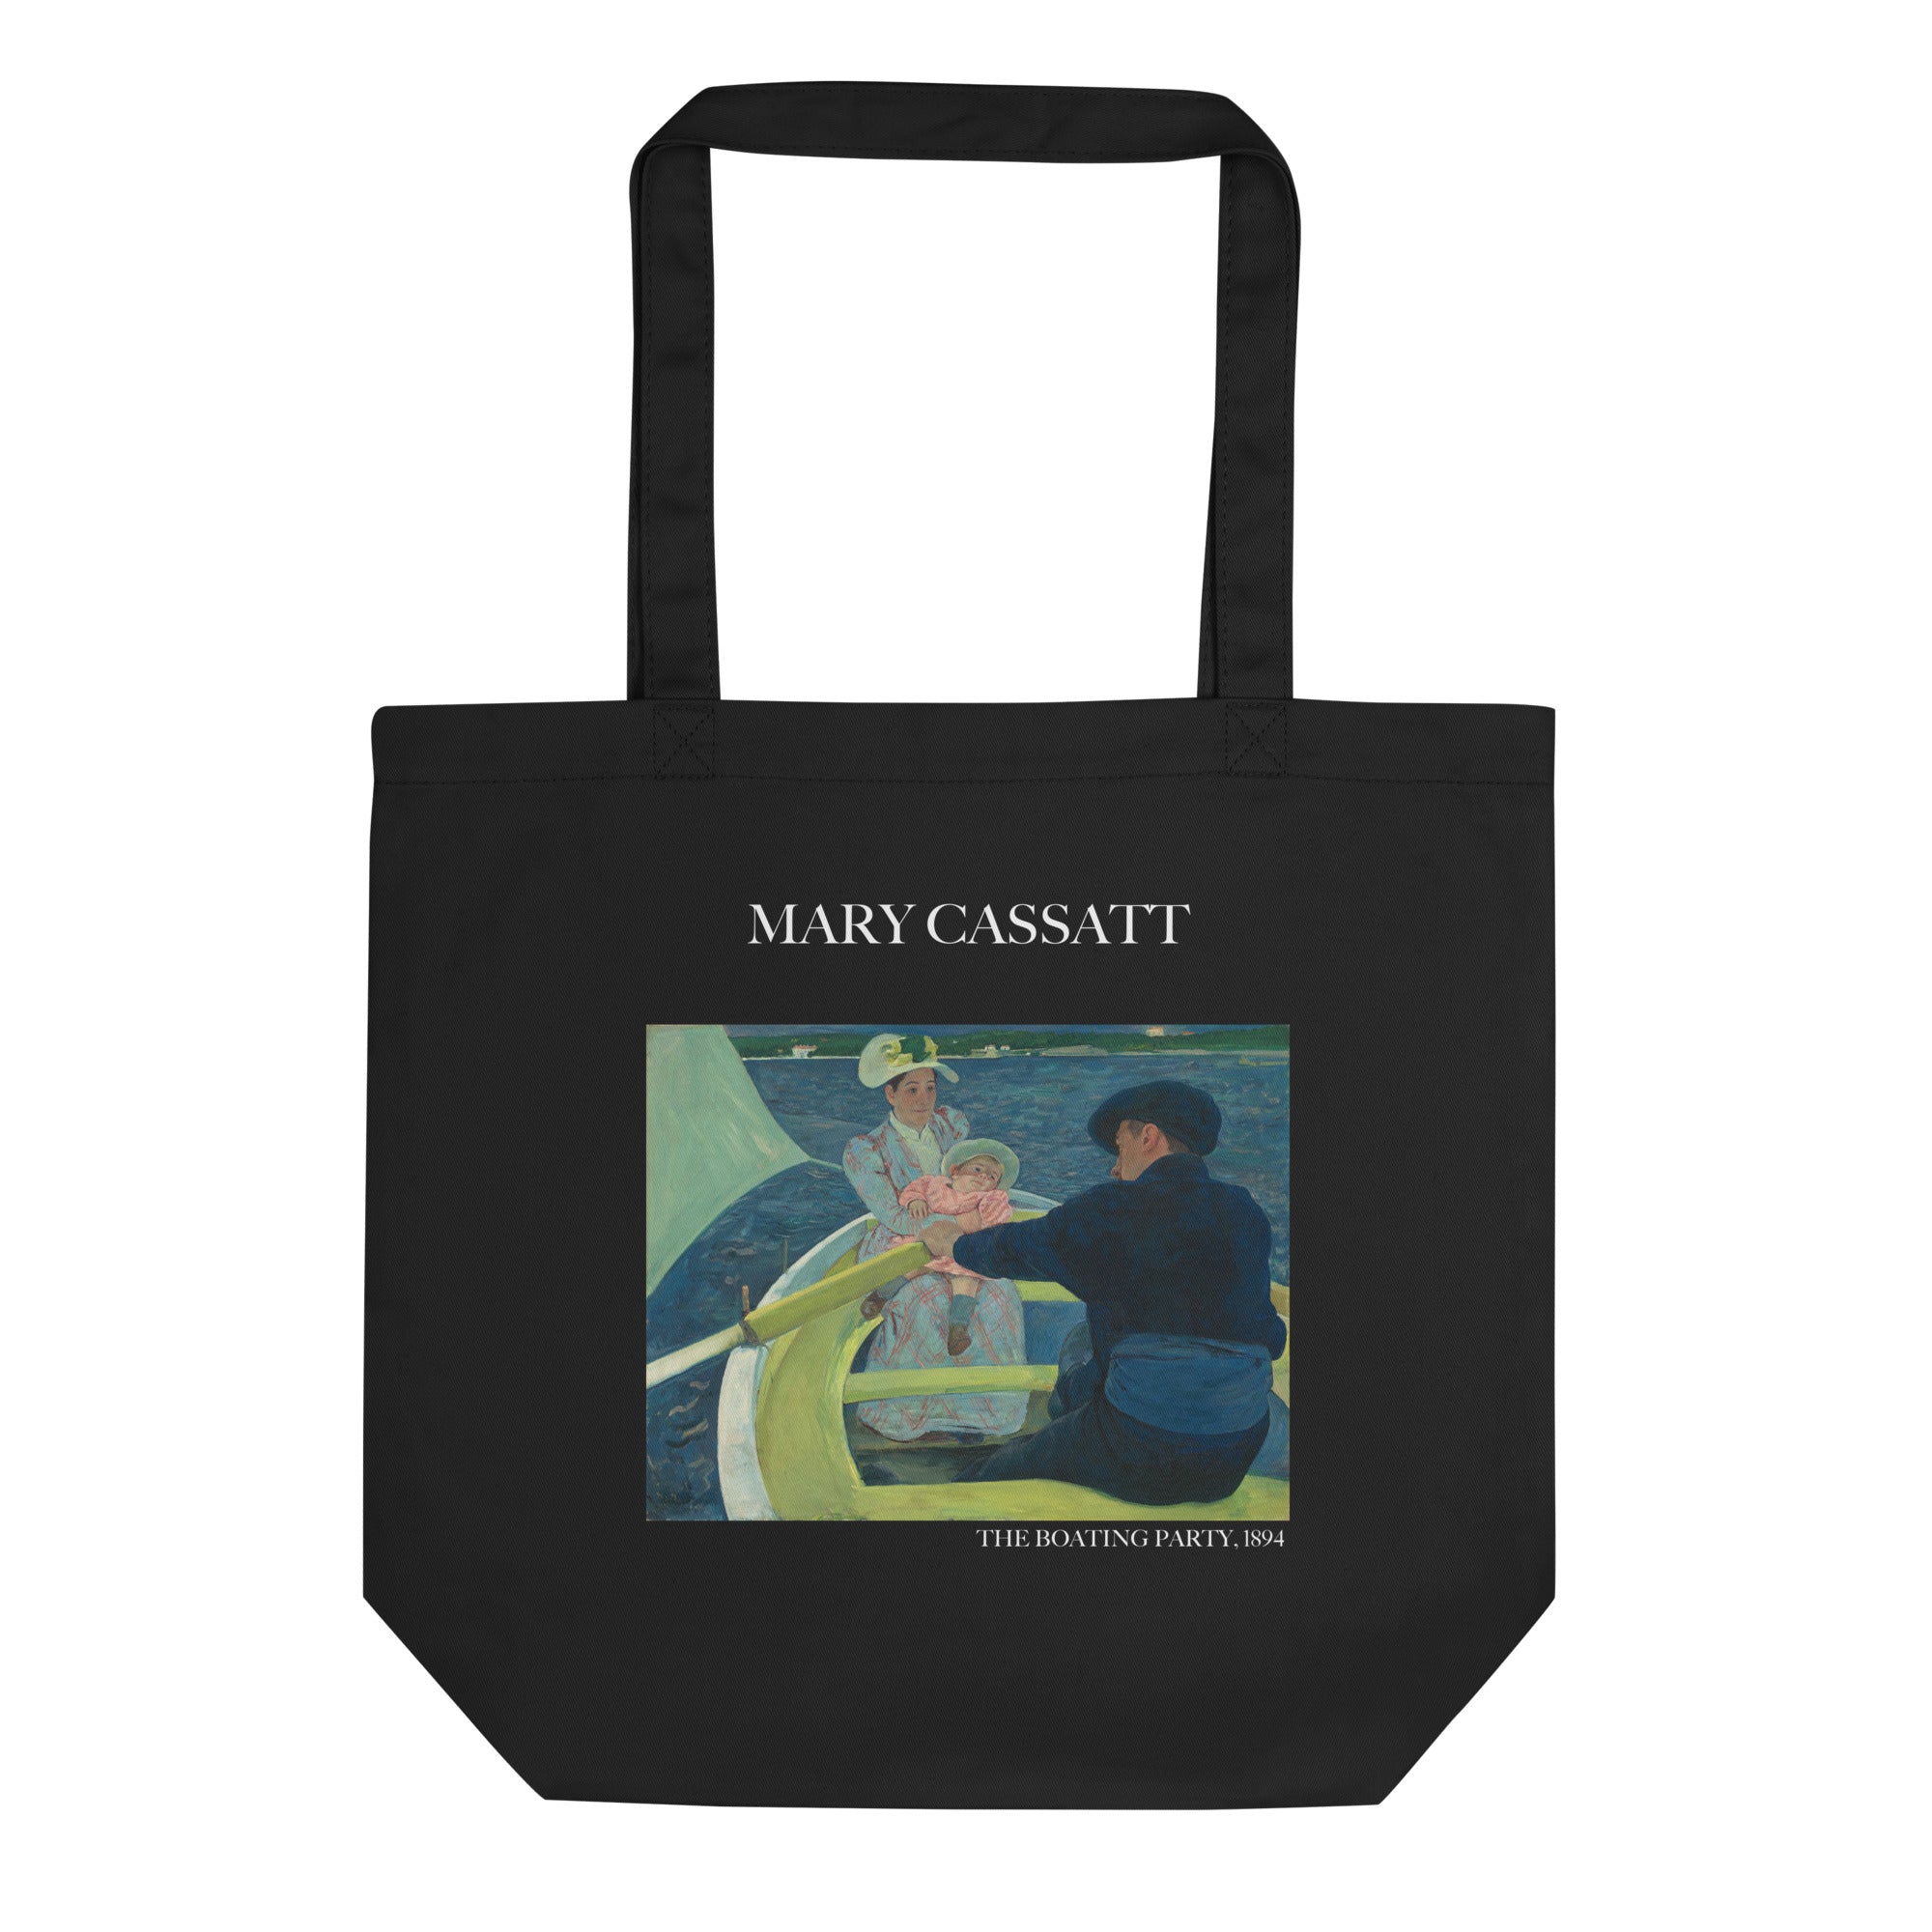 Mary Cassatt 'The Boating Party' Famous Painting Totebag | Eco Friendly Art Tote Bag